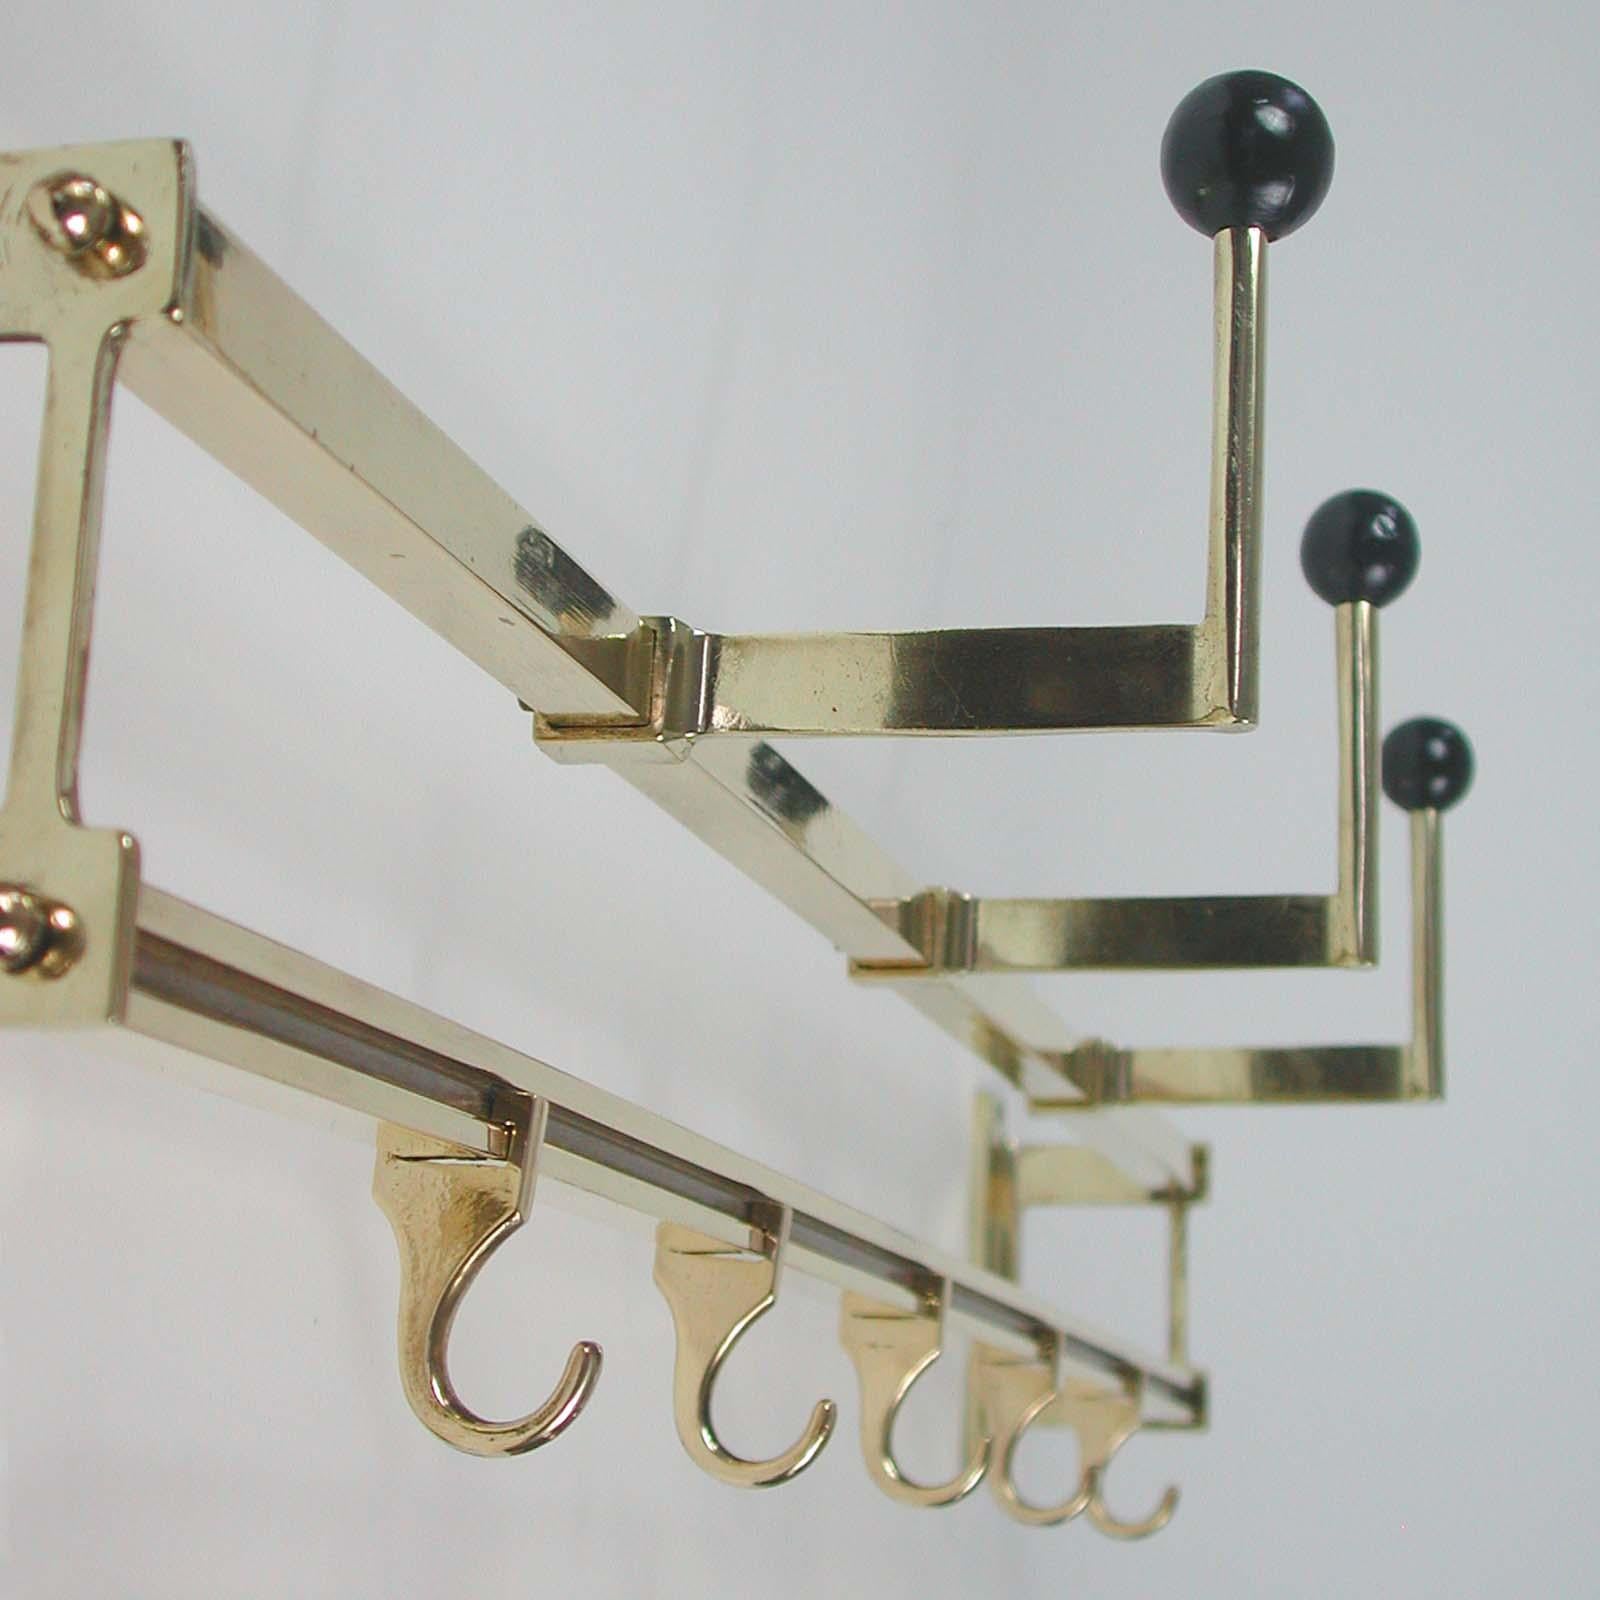 Lacquered 1930s Art Deco Bauhaus Brass and Wood Coat and Hat Rack